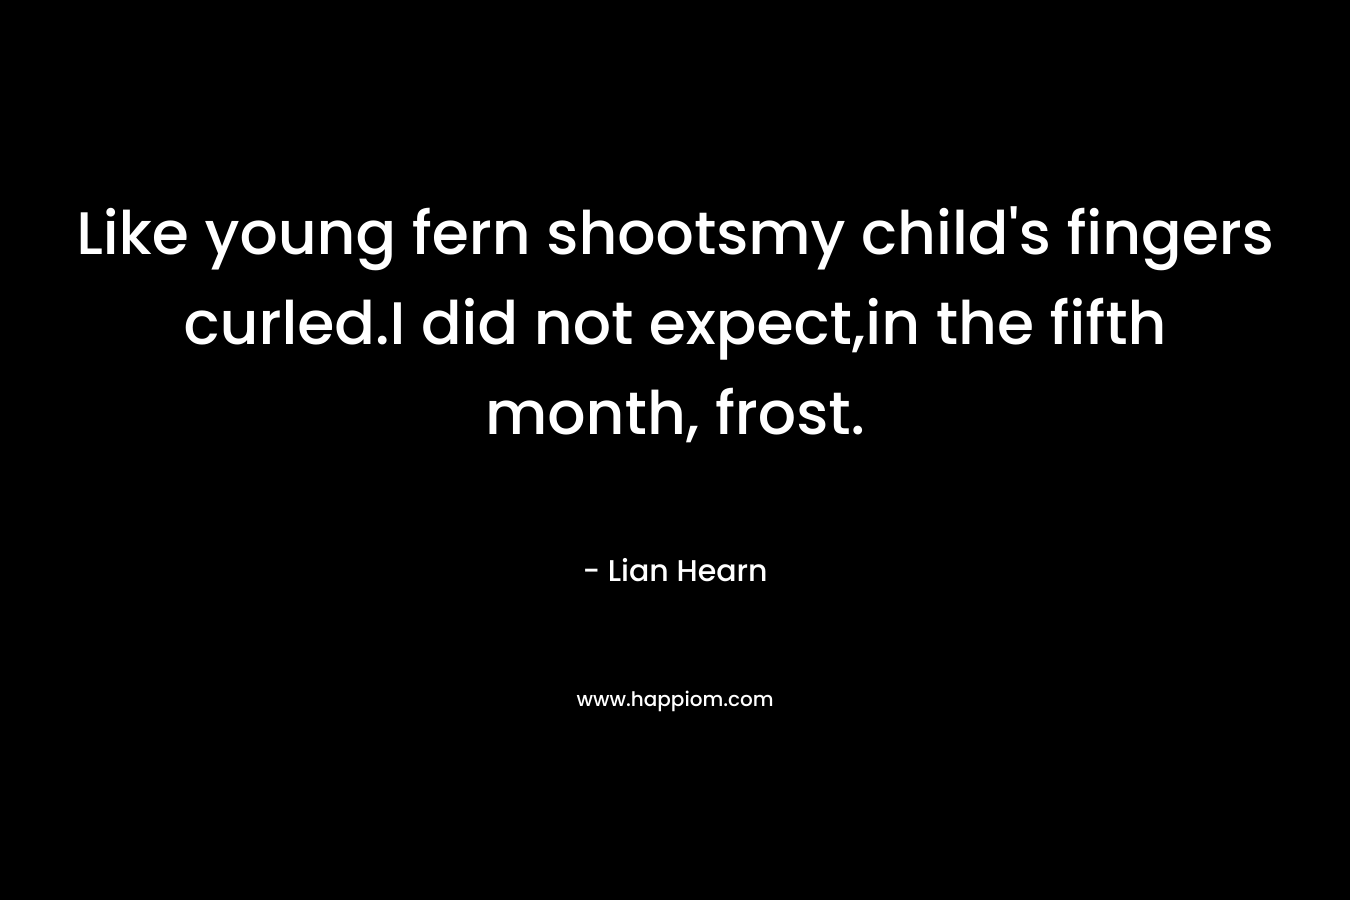 Like young fern shootsmy child's fingers curled.I did not expect,in the fifth month, frost.